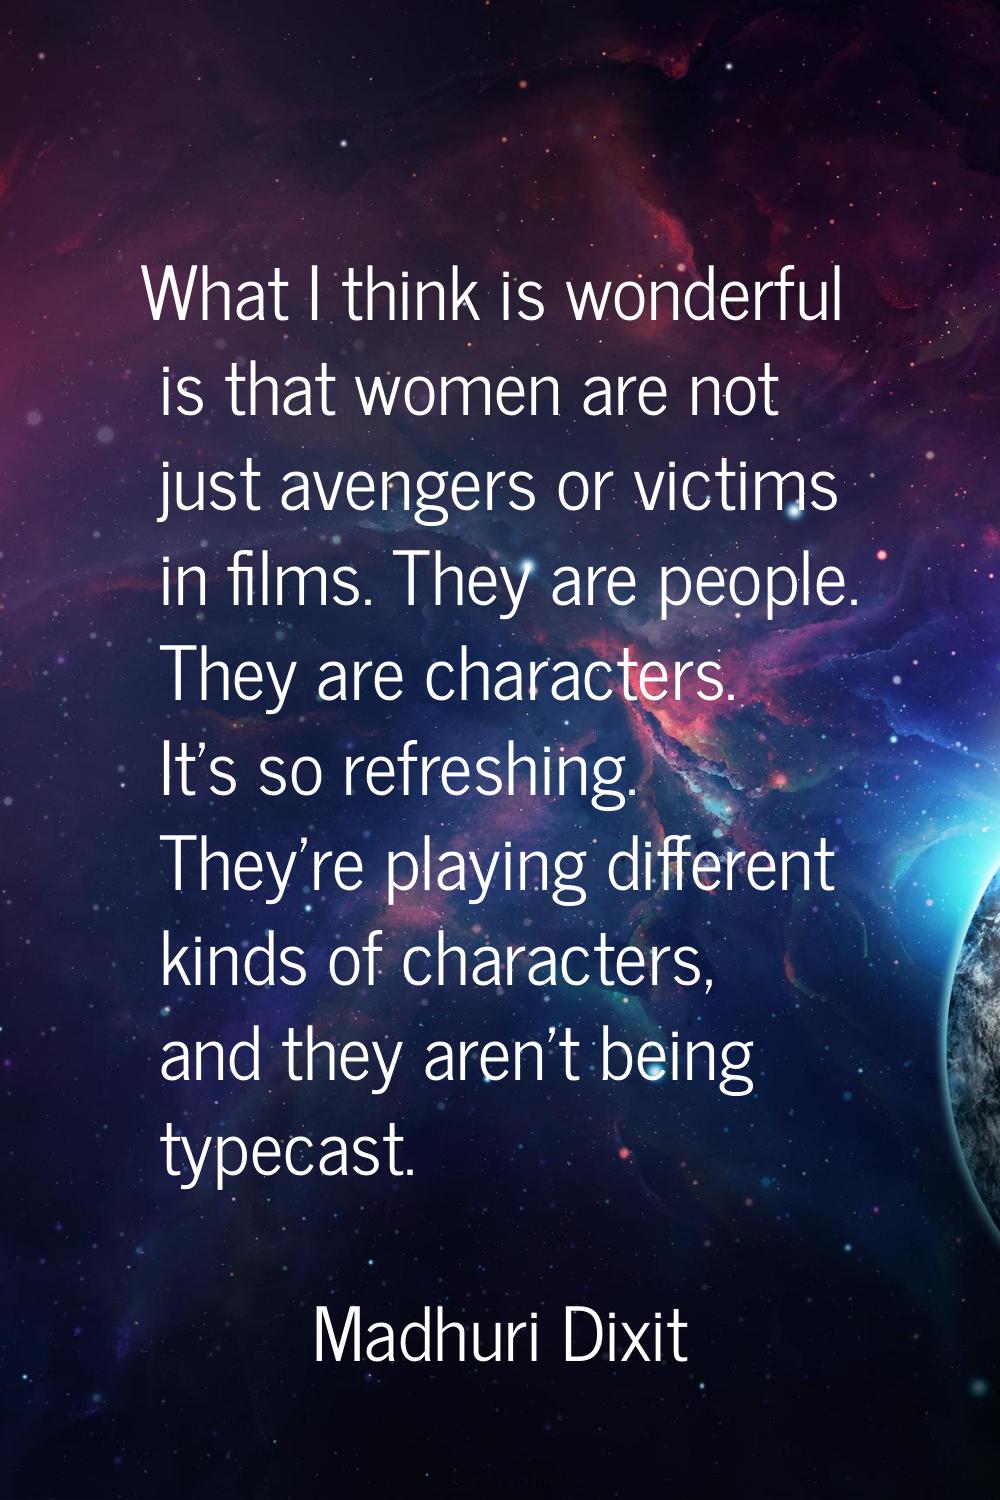 What I think is wonderful is that women are not just avengers or victims in films. They are people.